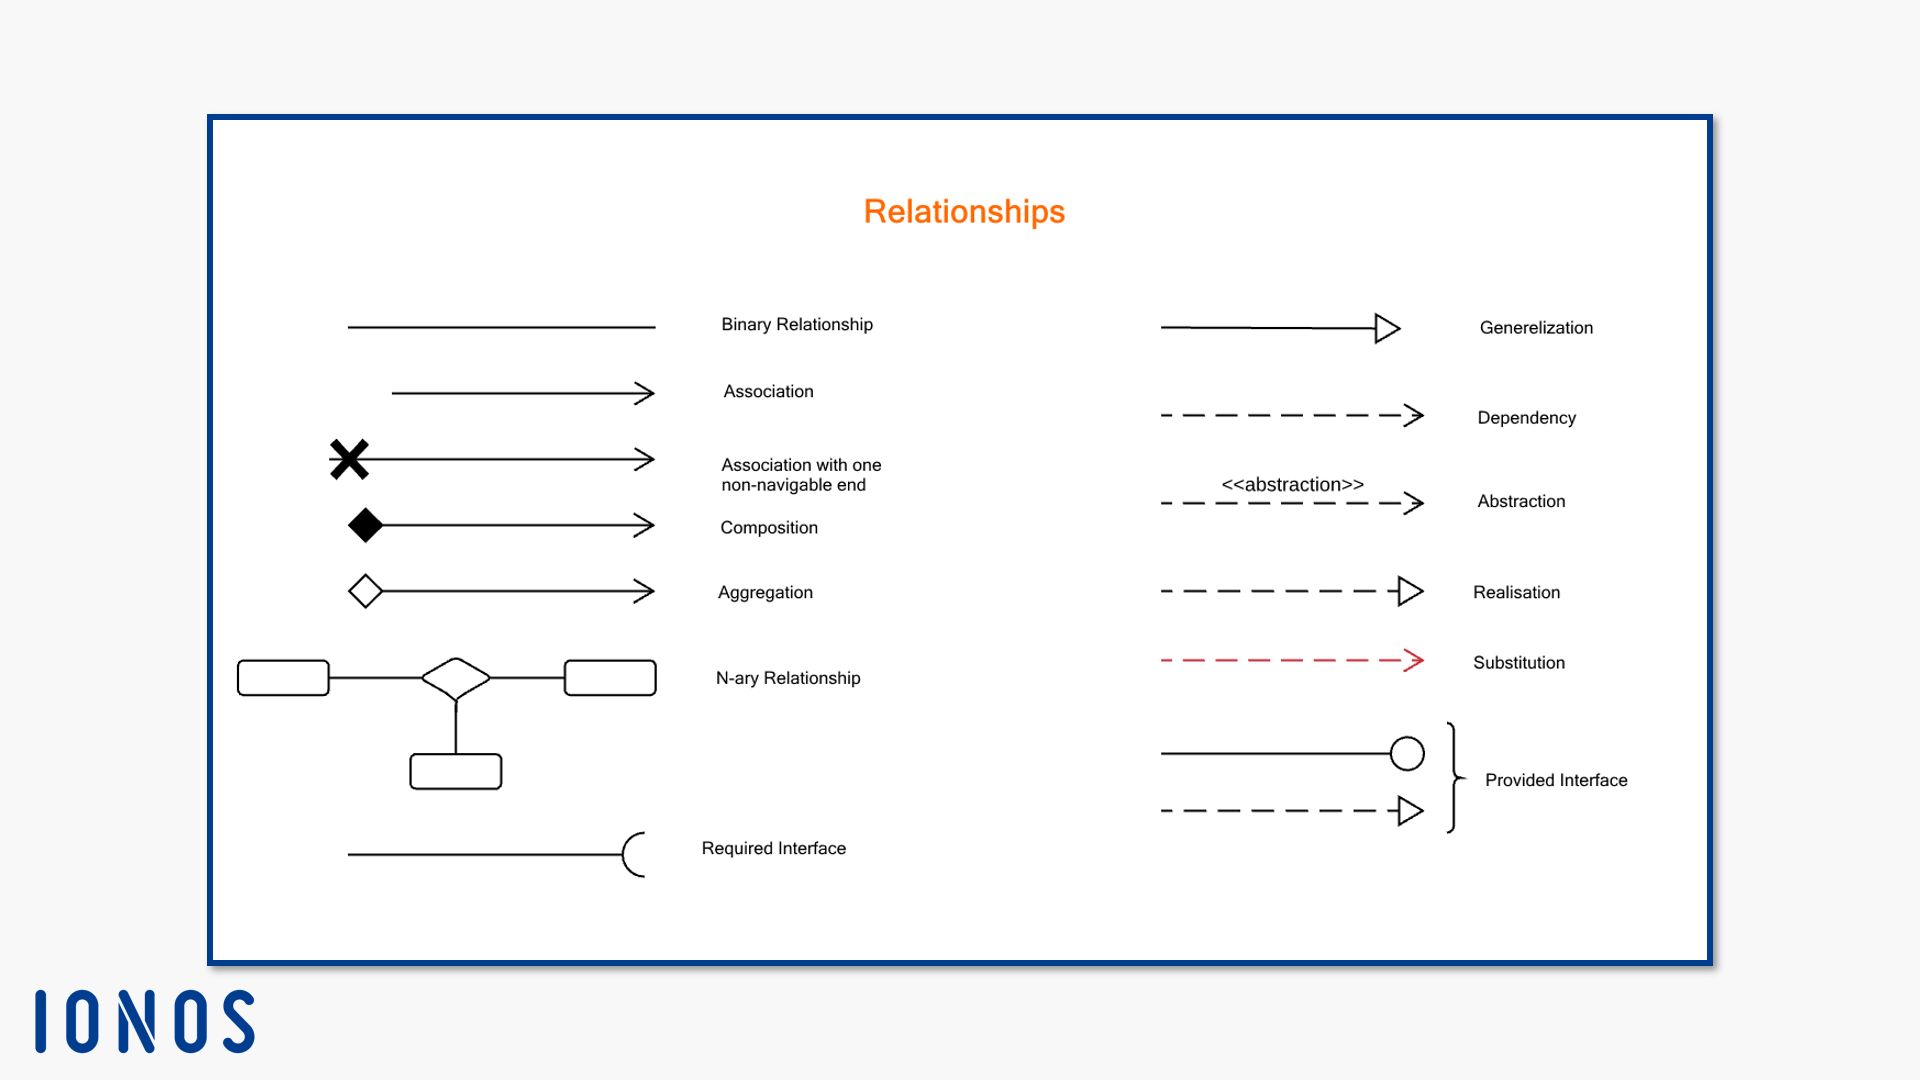 All relationship edges for UML class diagrams at a glance.